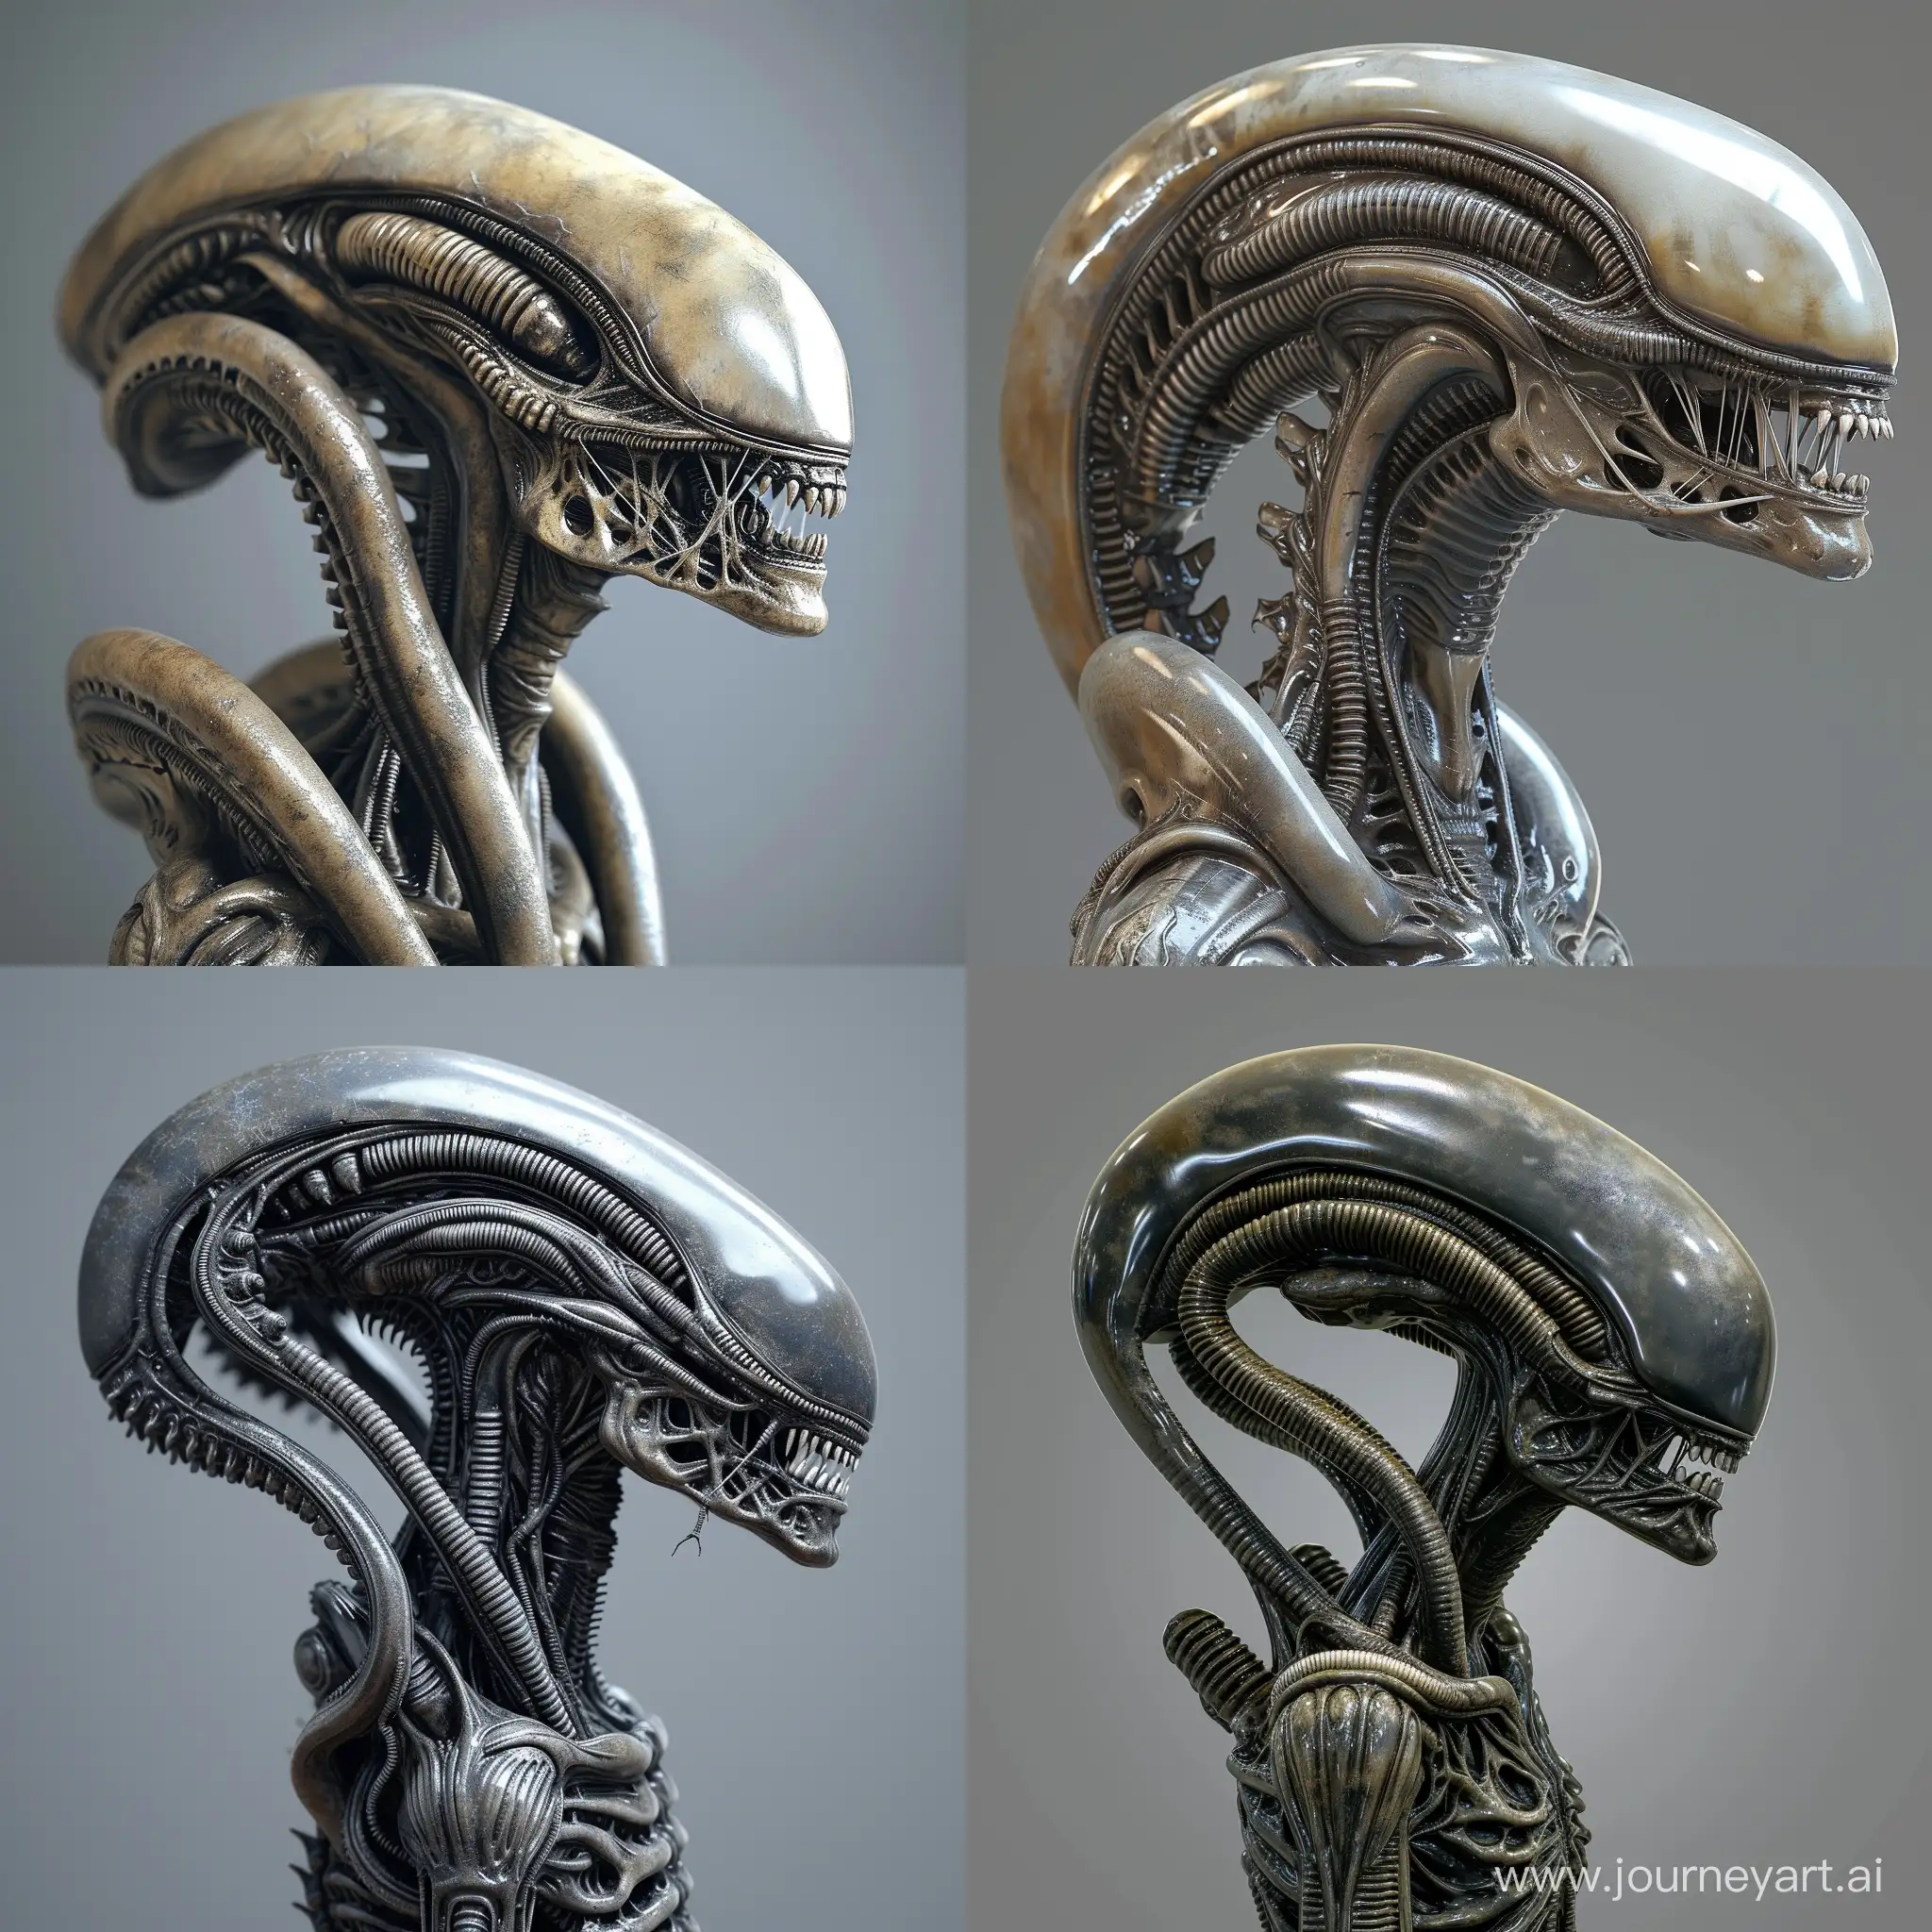 Alien-Creature-in-Hans-Giger-Style-Against-Gray-Background